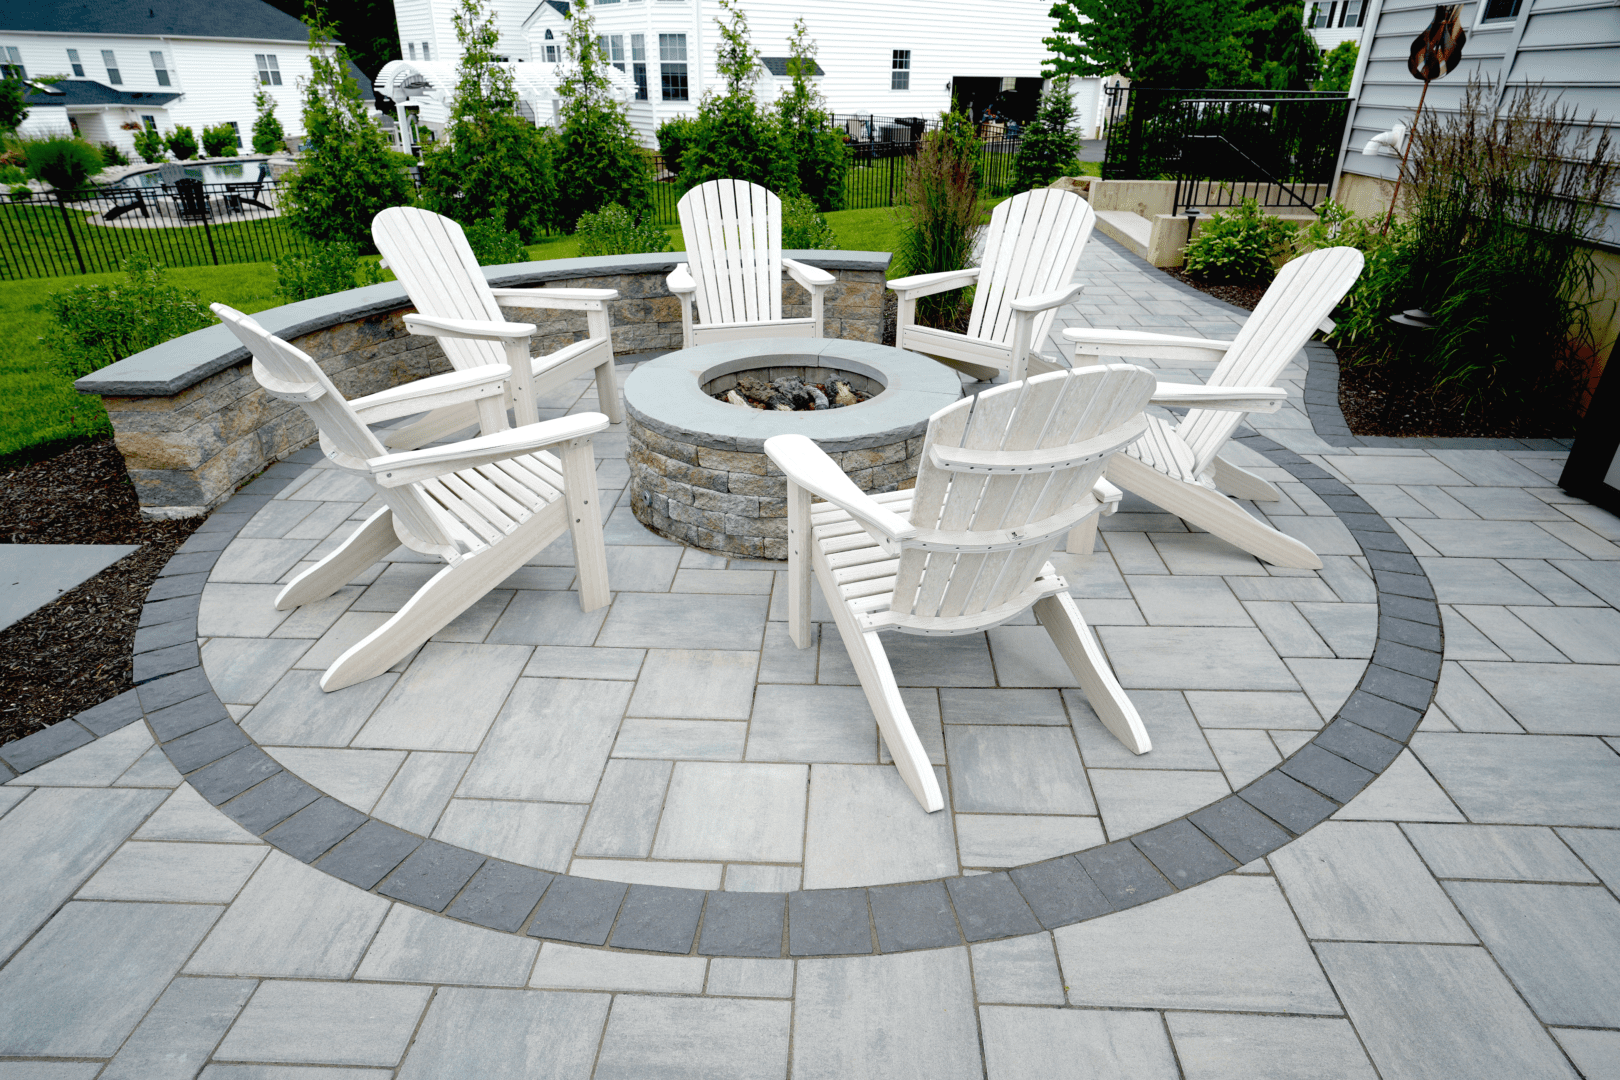 A hardscape design featuring a patio with white chairs and a fire pit.